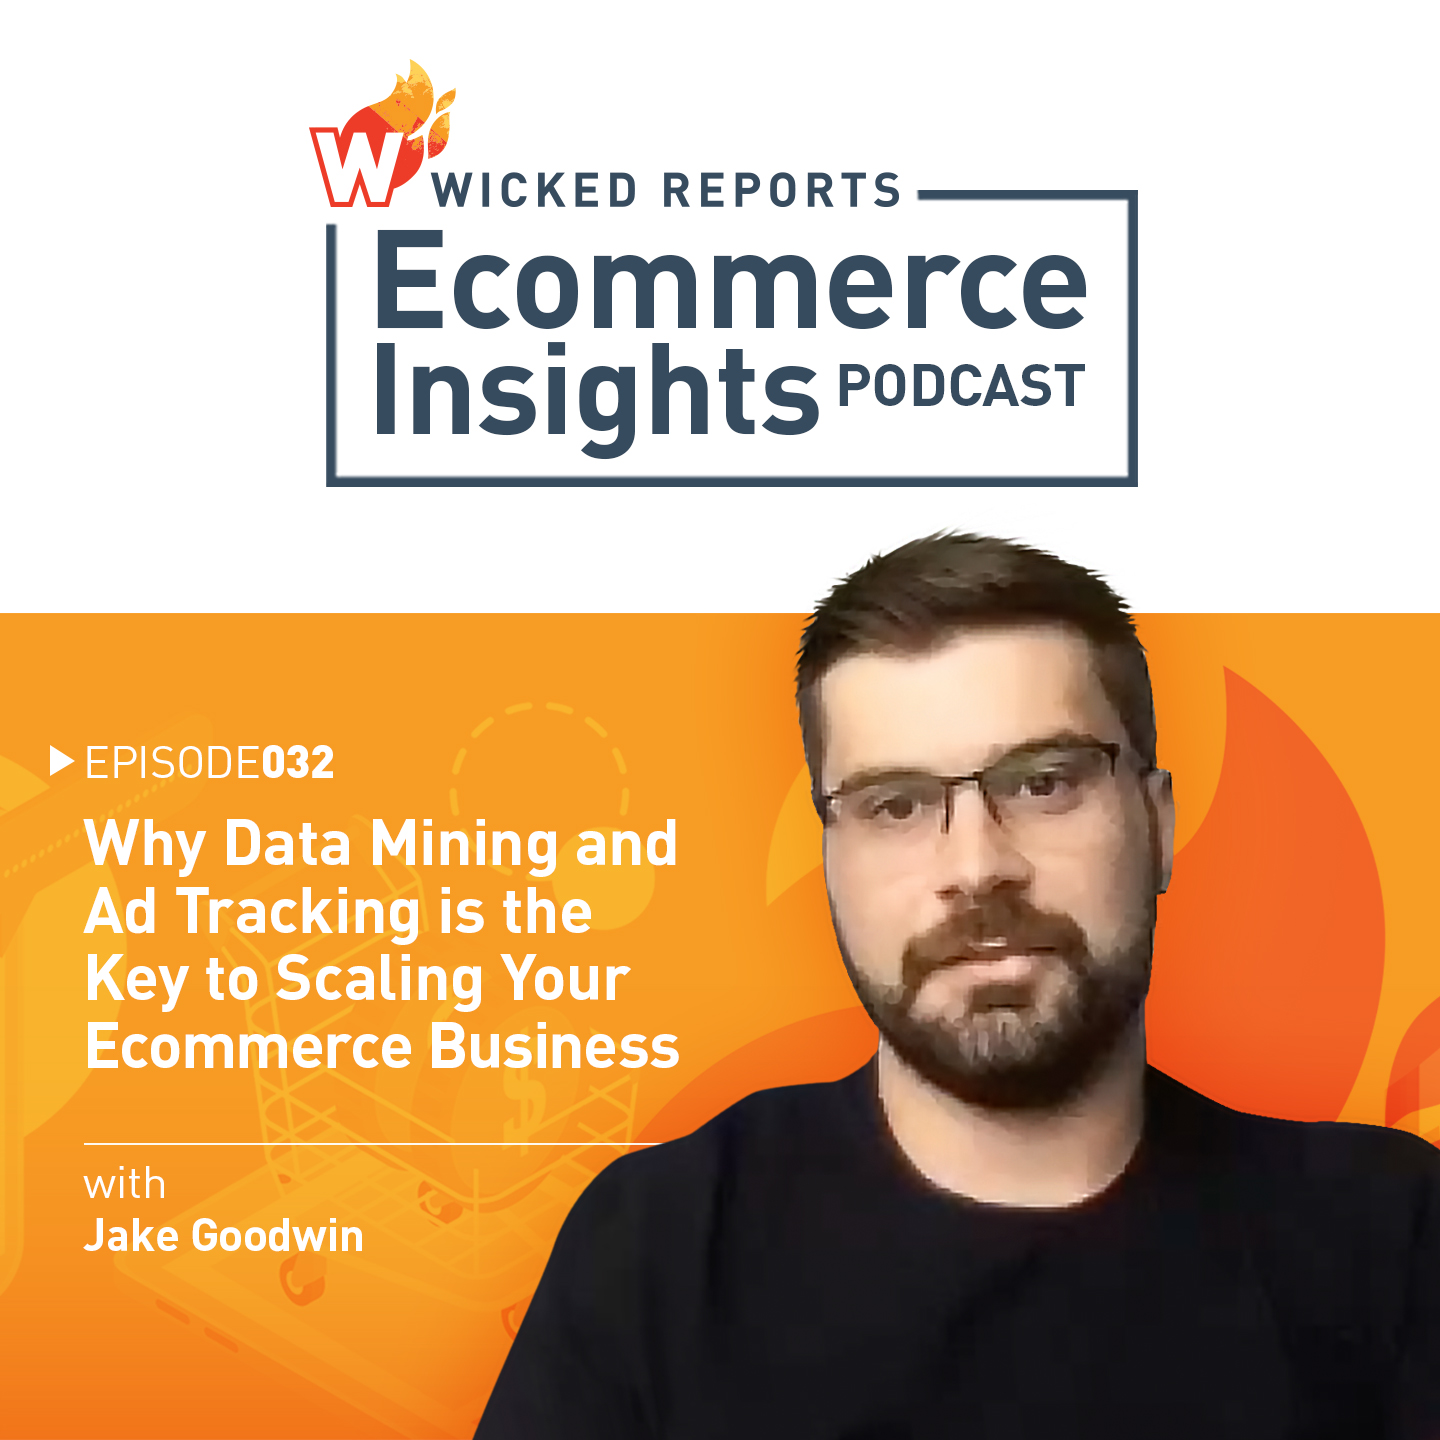 Why Data Mining and Ad Tracking is the Key to Scaling Your Ecommerce Business